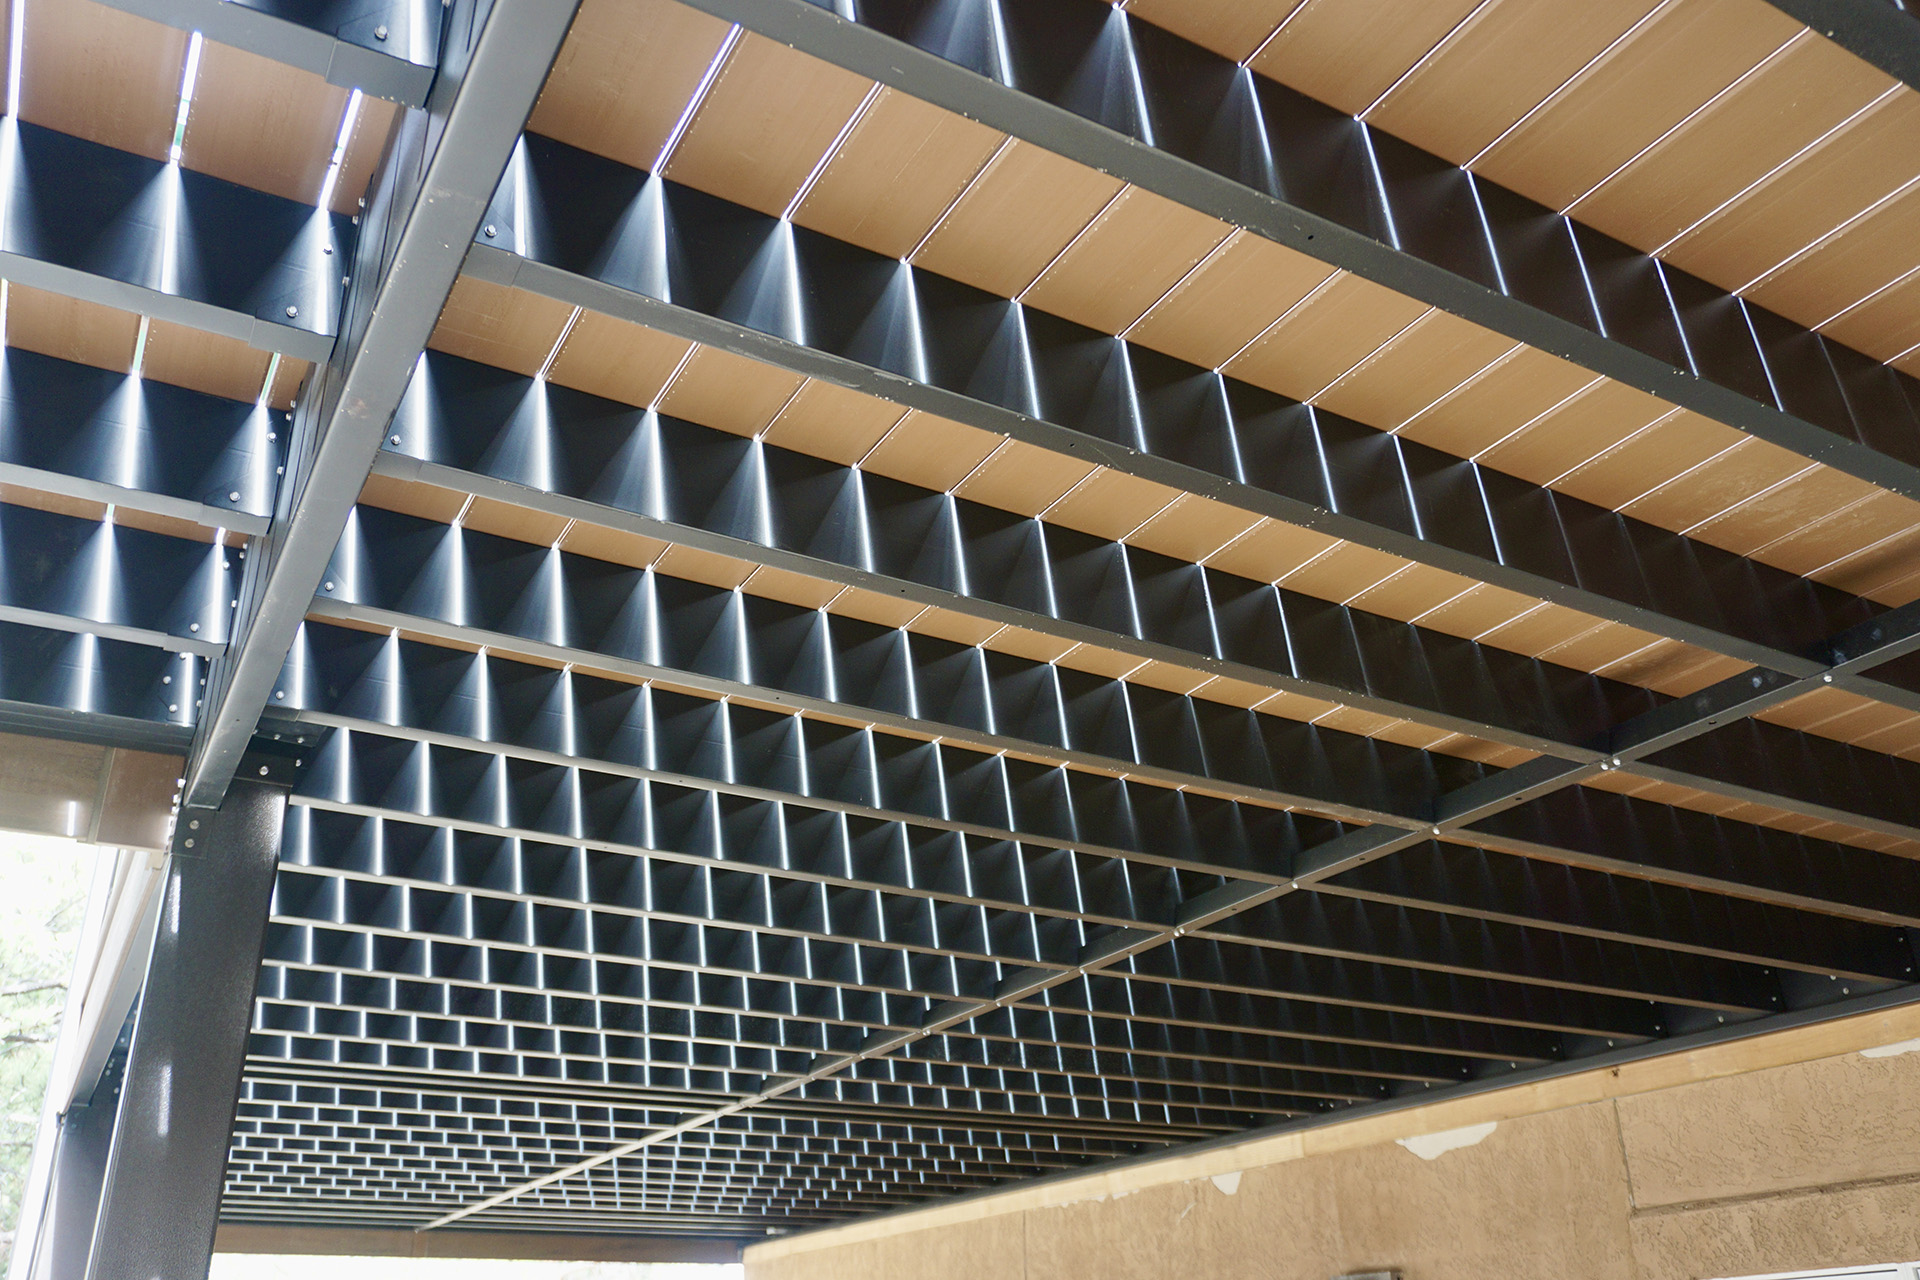 Underneath view of a steel deck frame with composite decking boards.